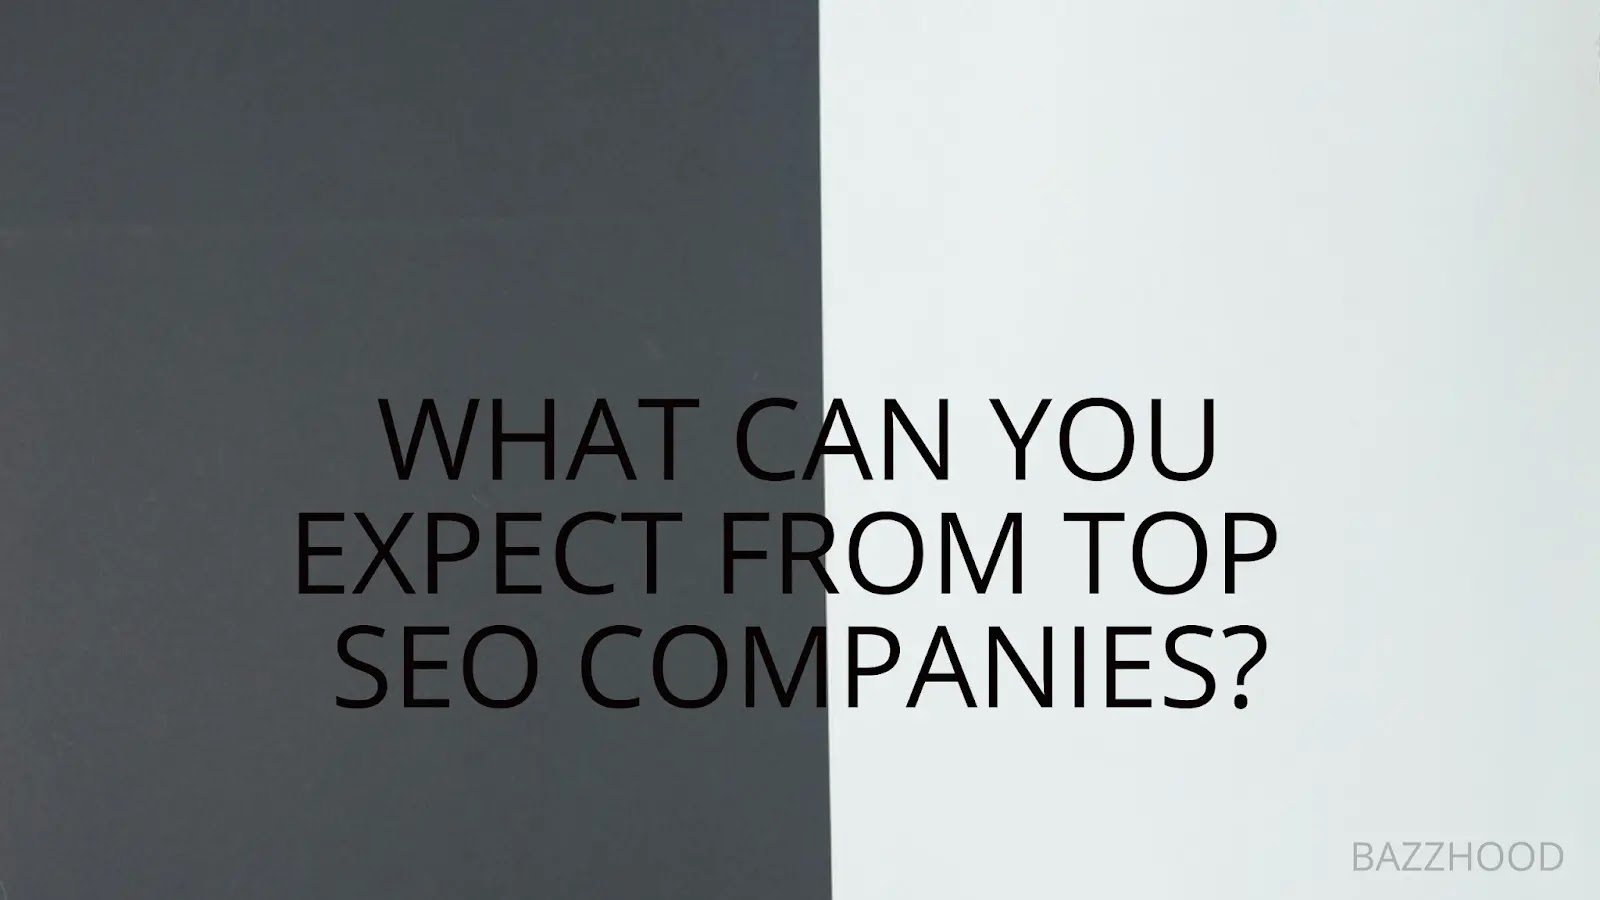 What is the best SEO company?